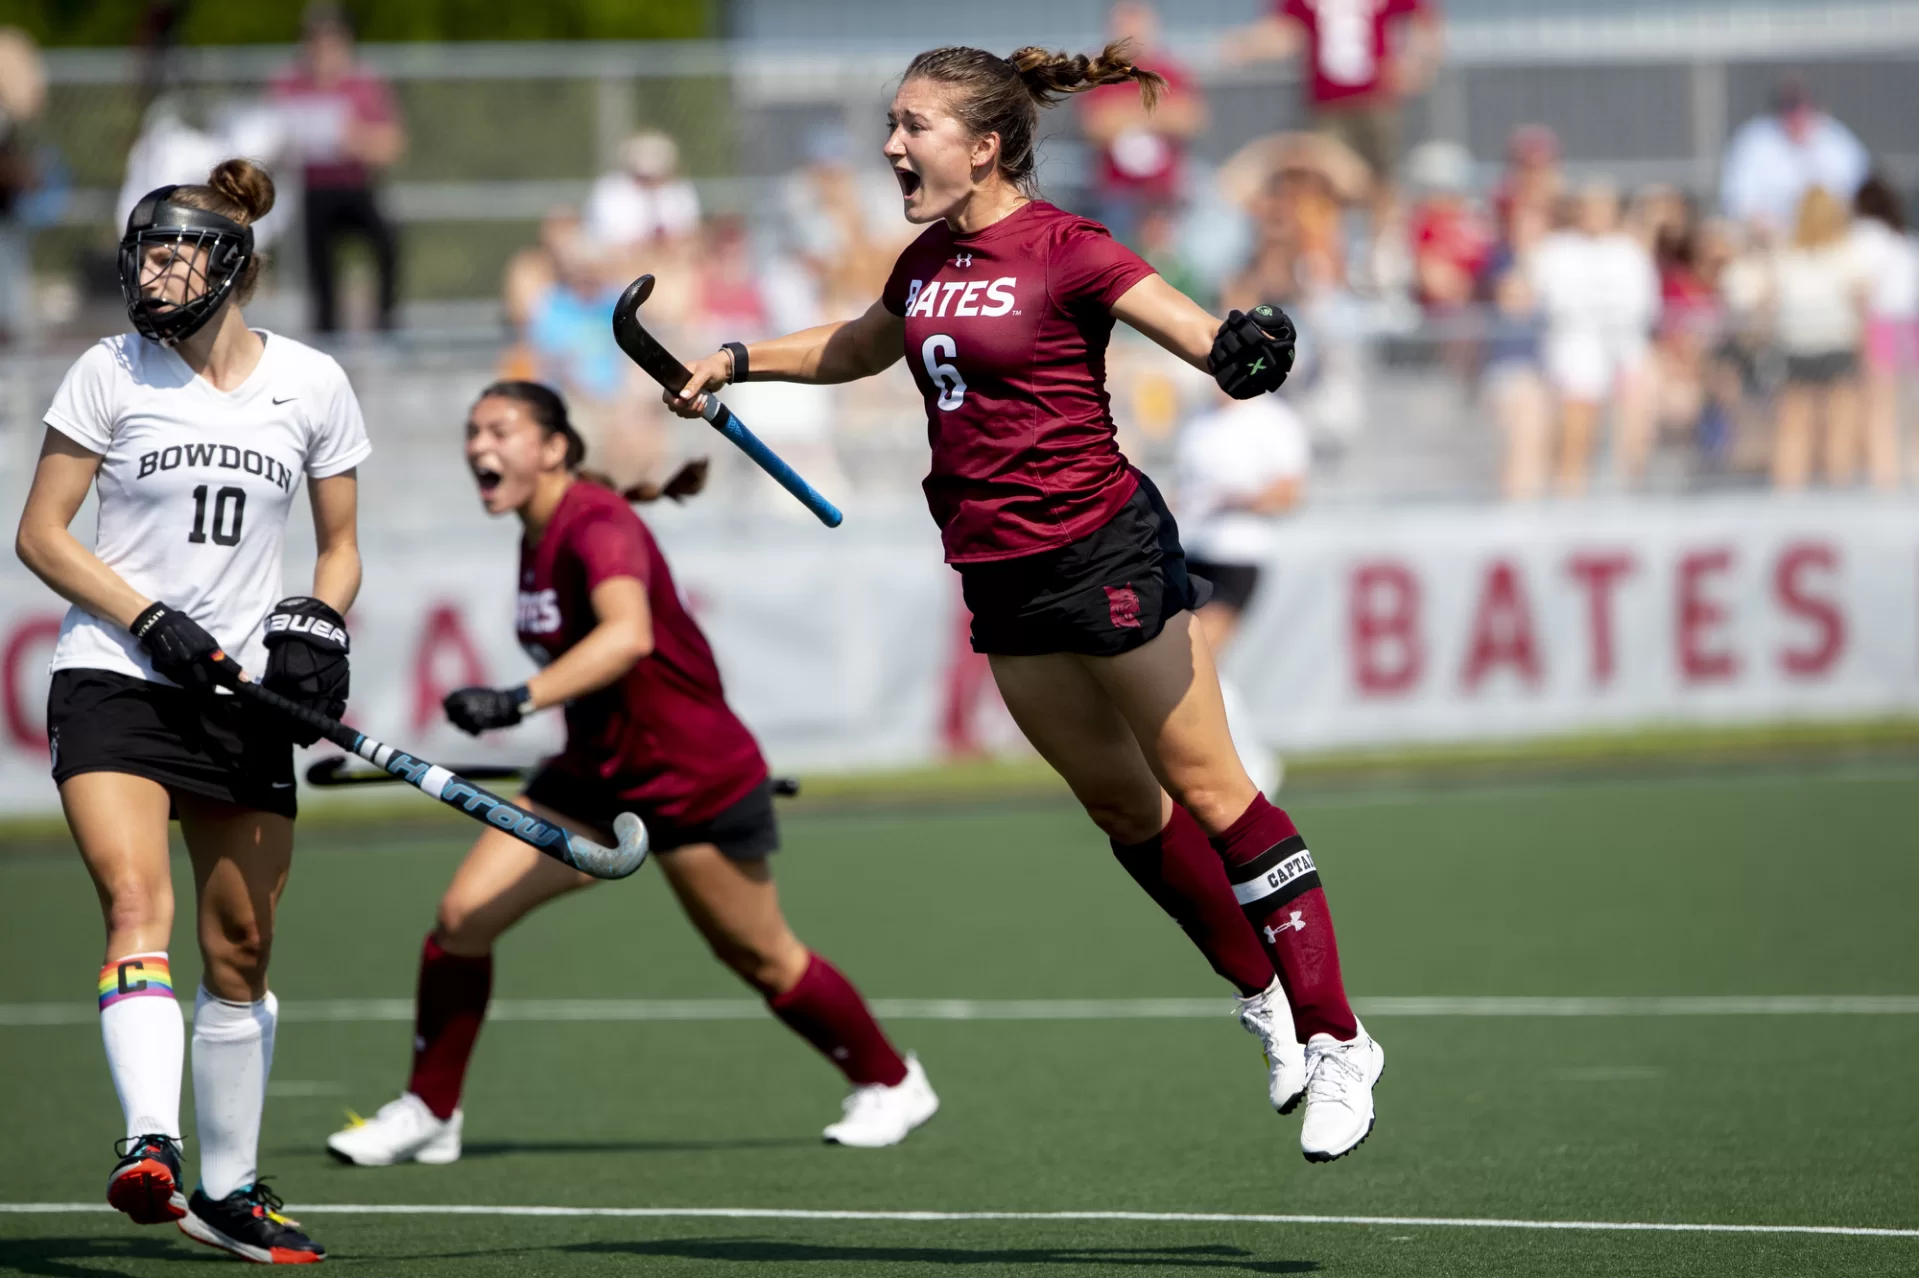 Bates Field Hockey defeats Bowdoin 2-1 in the home opener on Sept. 10, 2022.